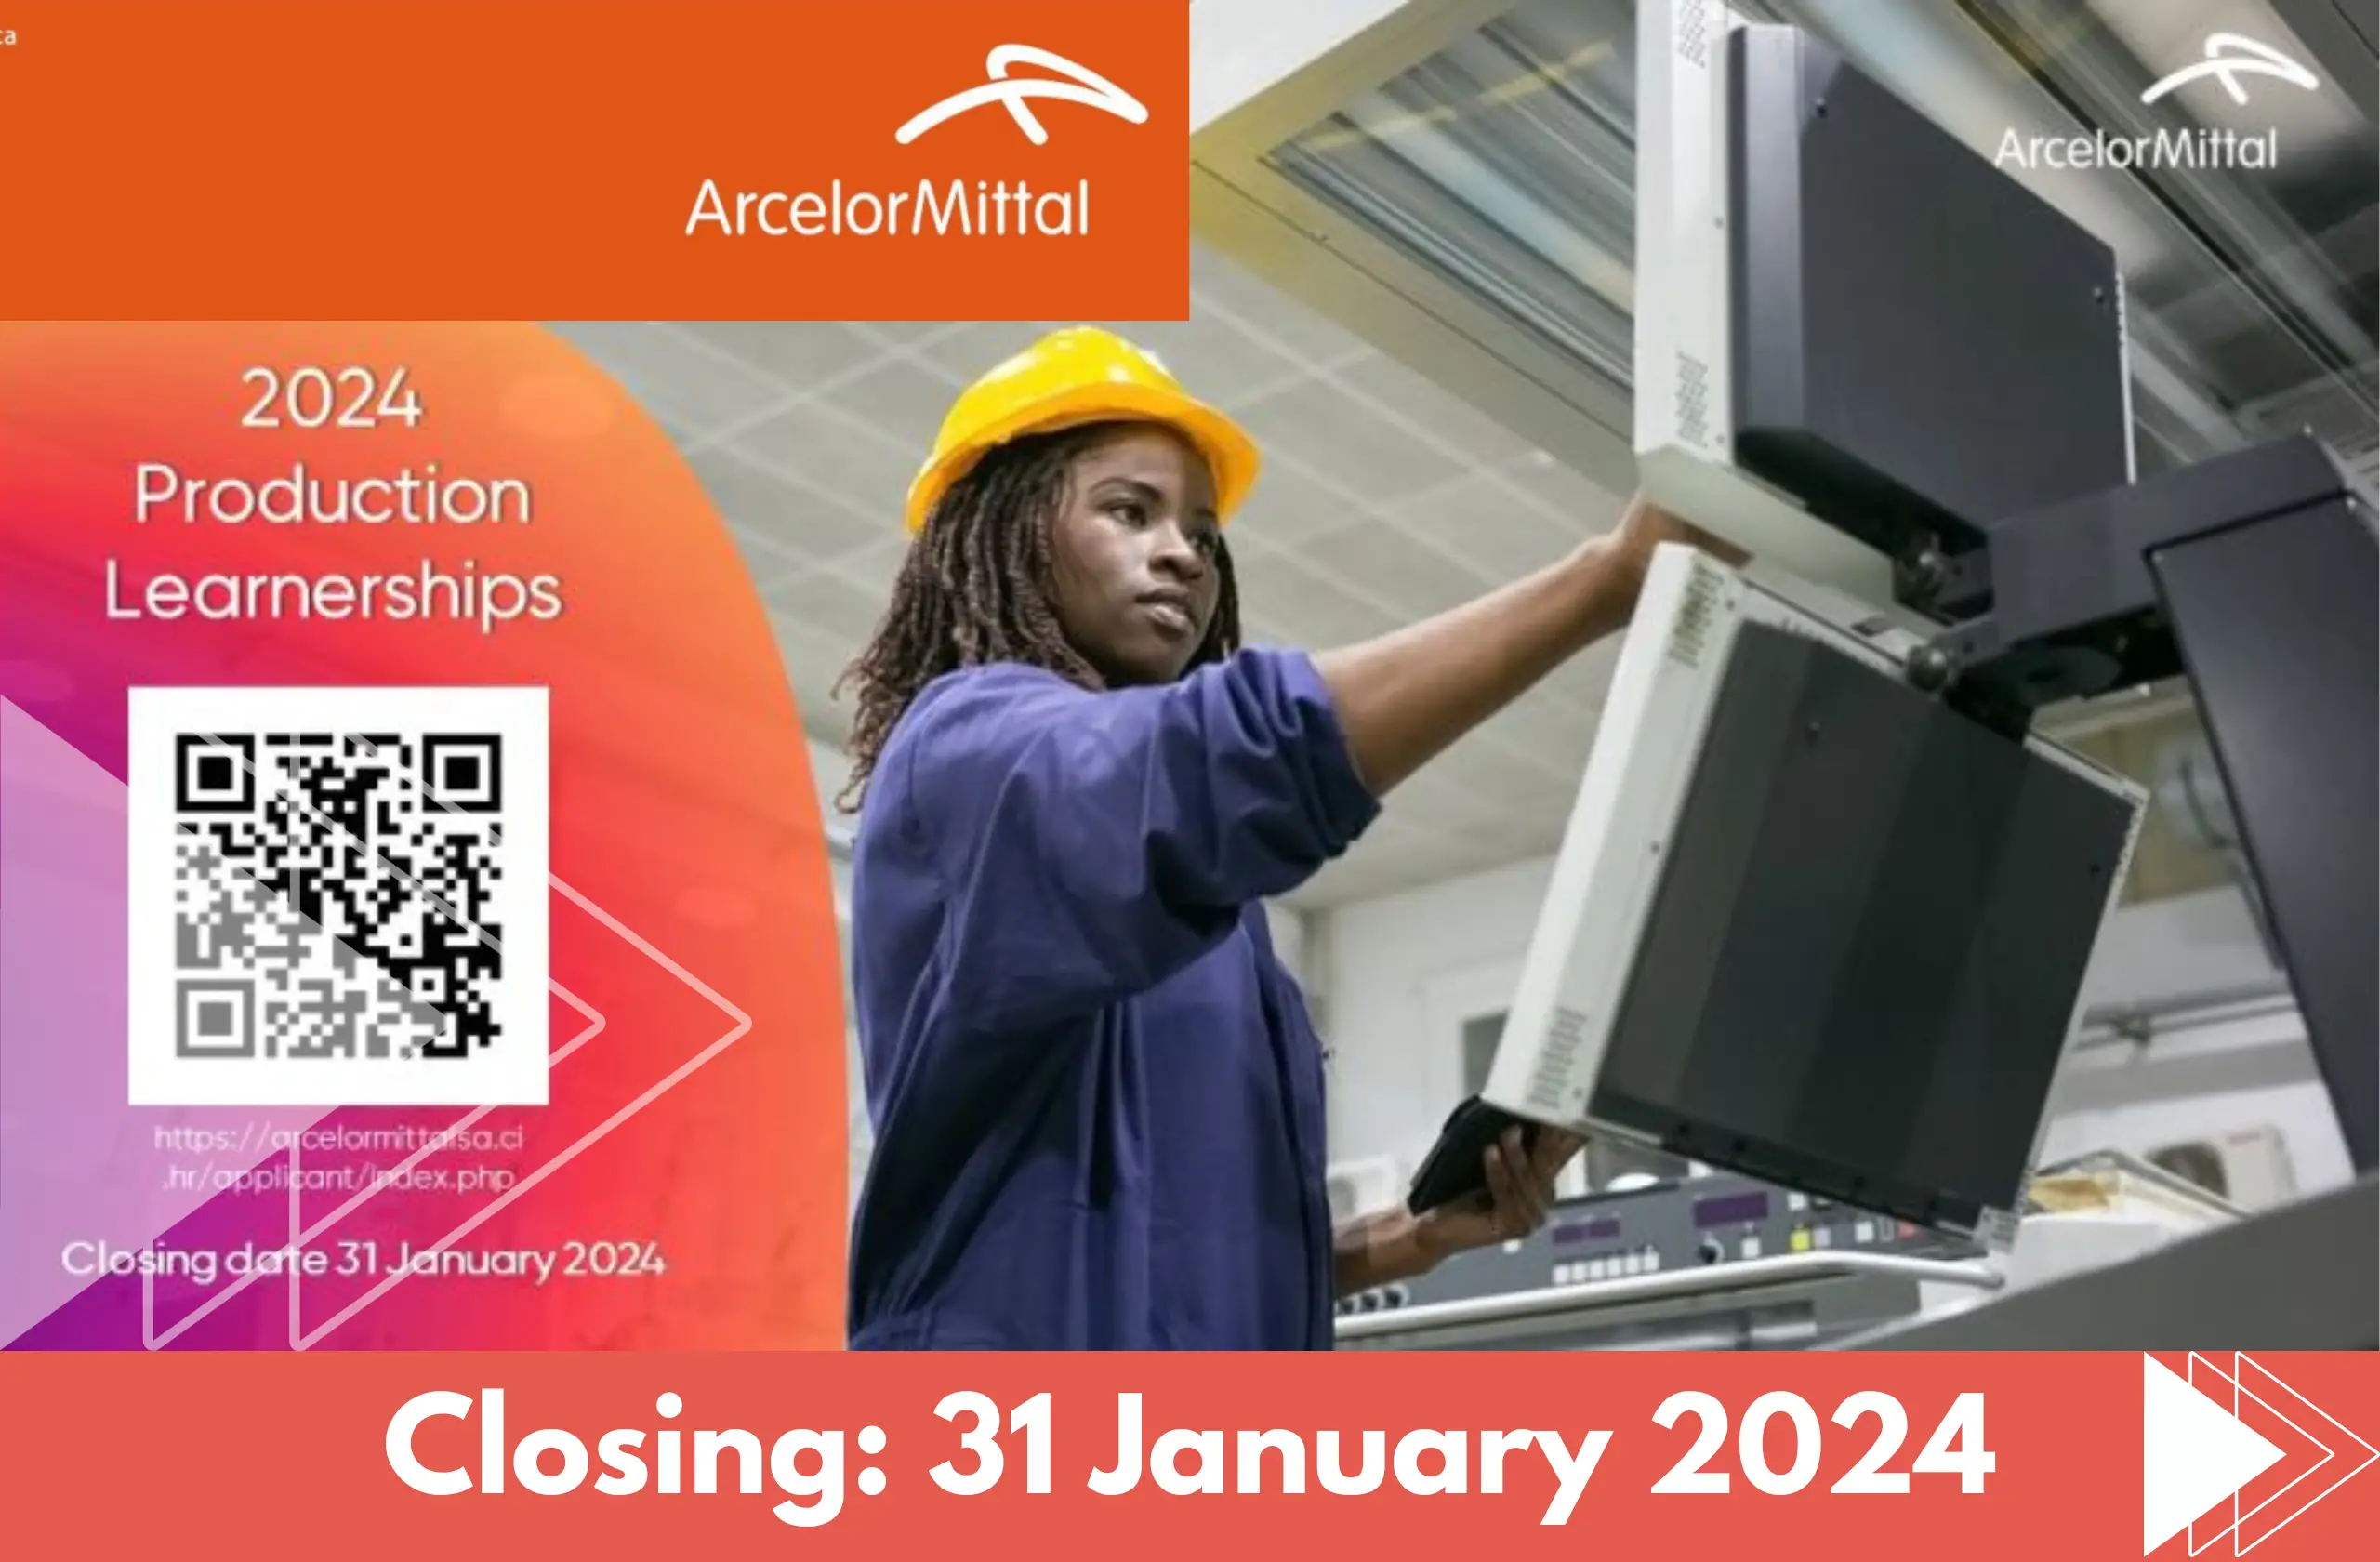 ArcelorMittal: Production Learnerships